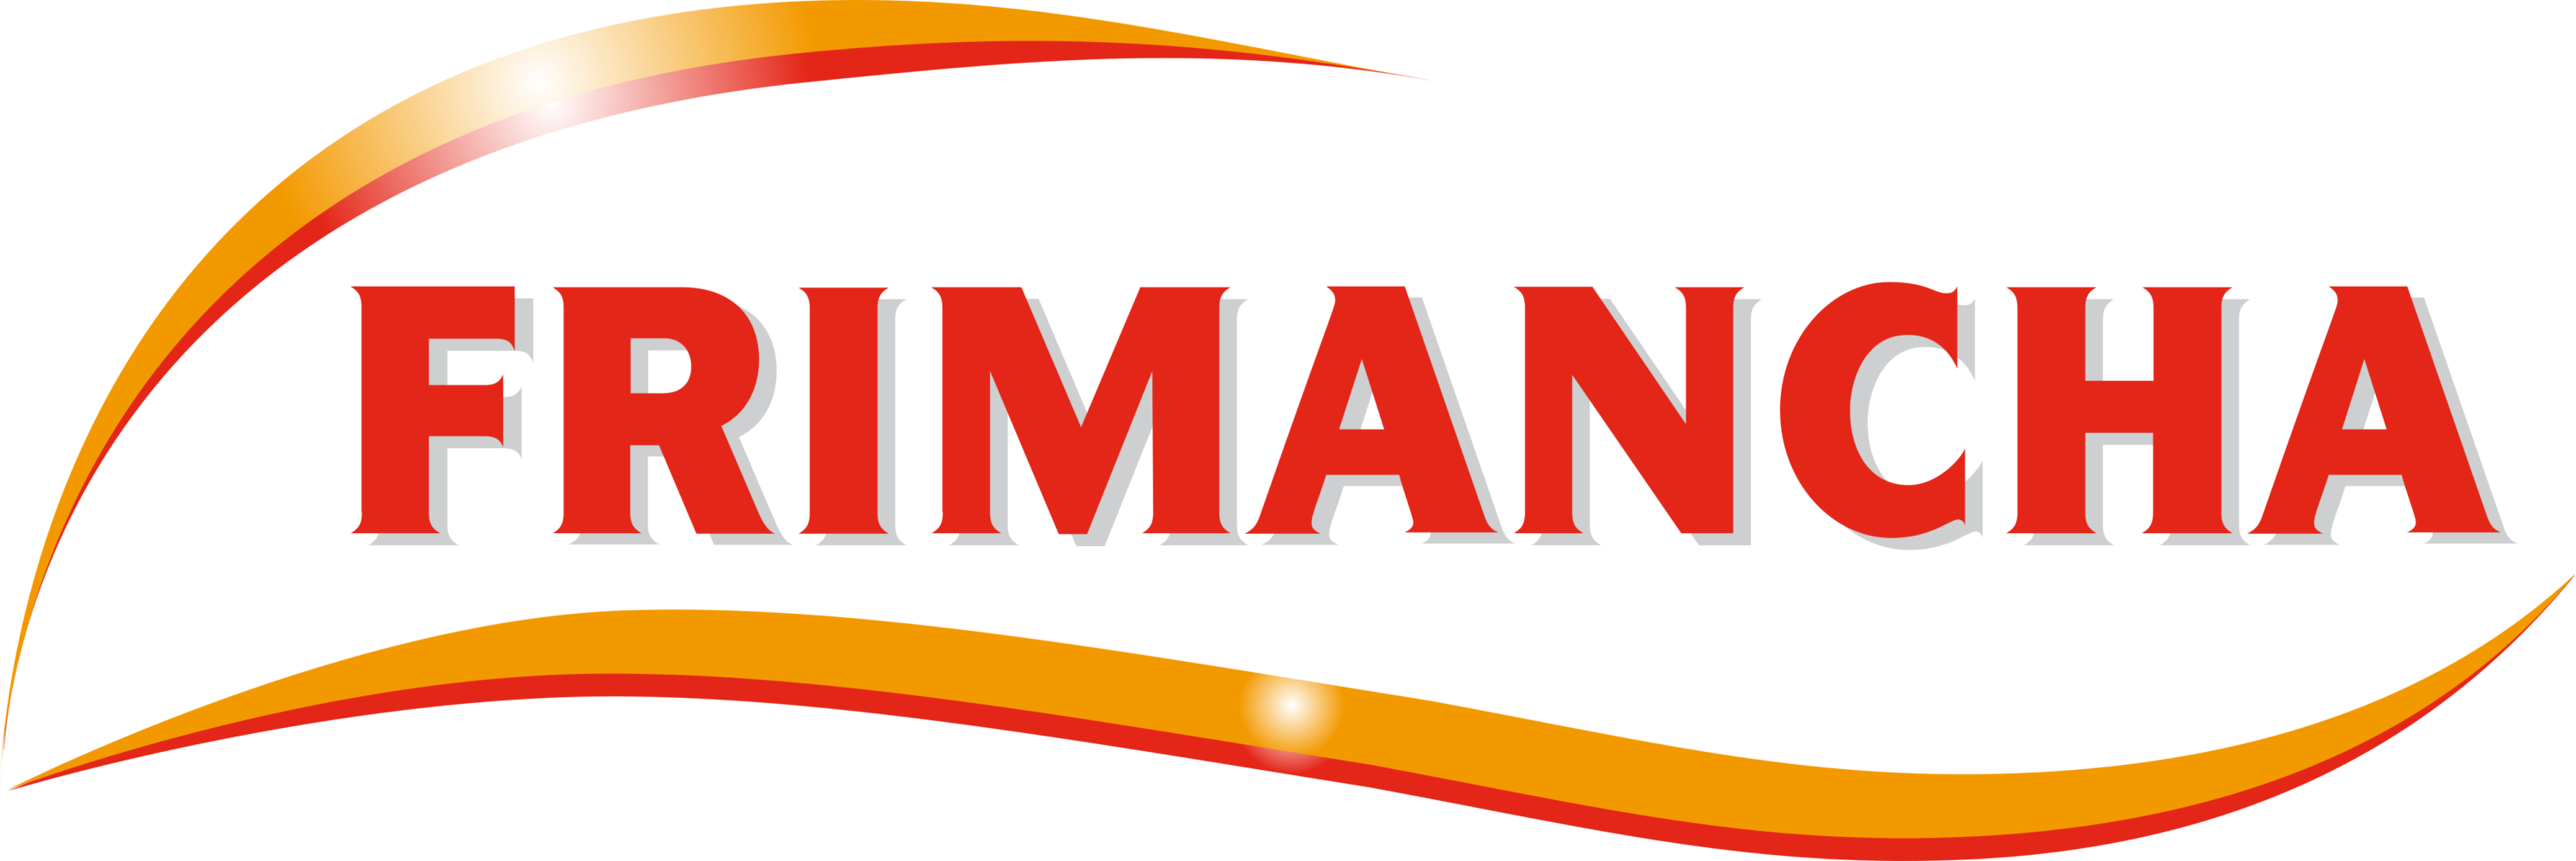 Frimancha Ind. Carnicas S.A Logo